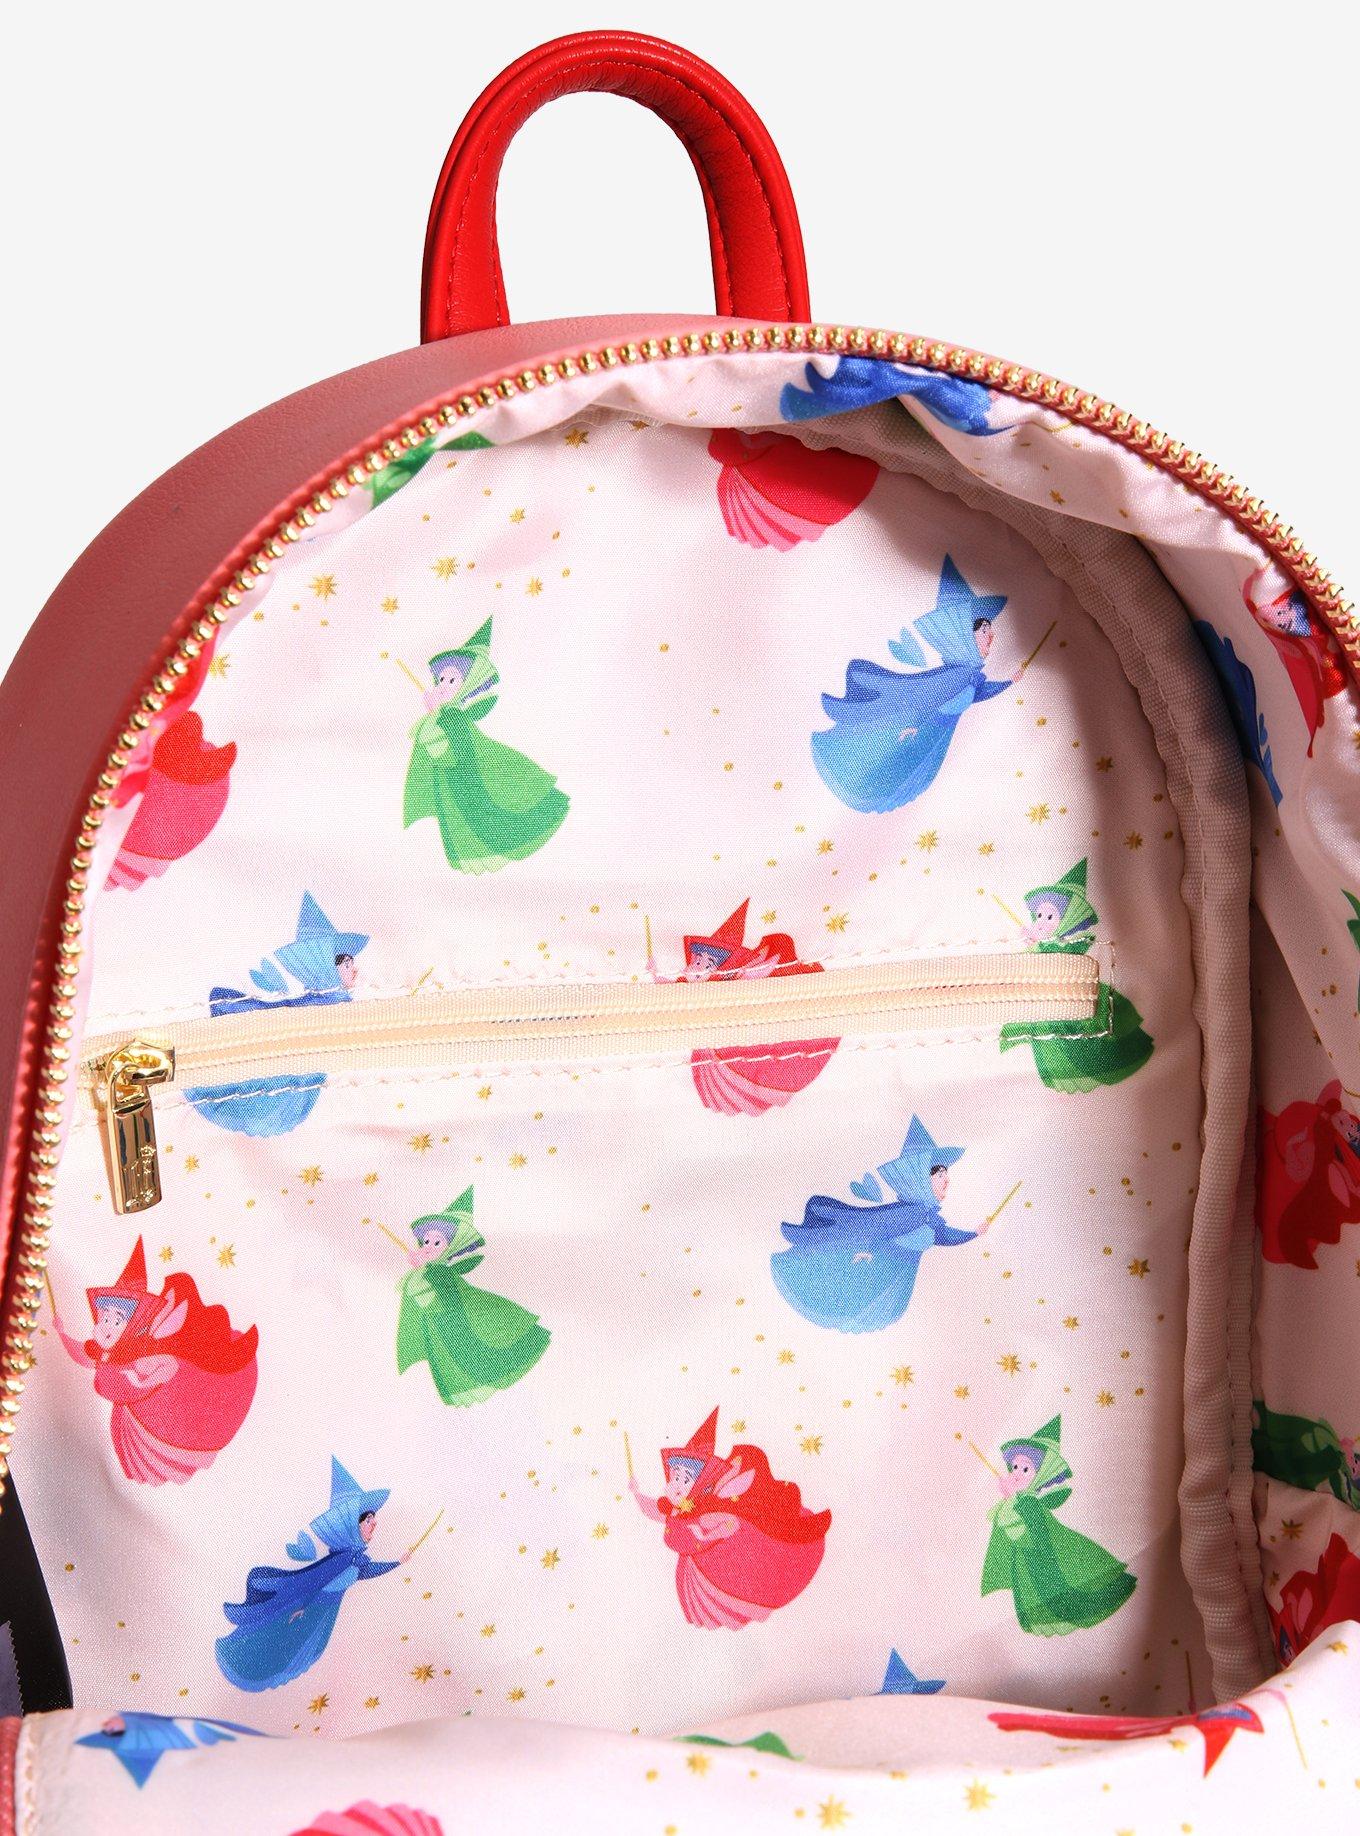 Disney by Loungefly Backpack Sleeping Beauty Floral Fairy